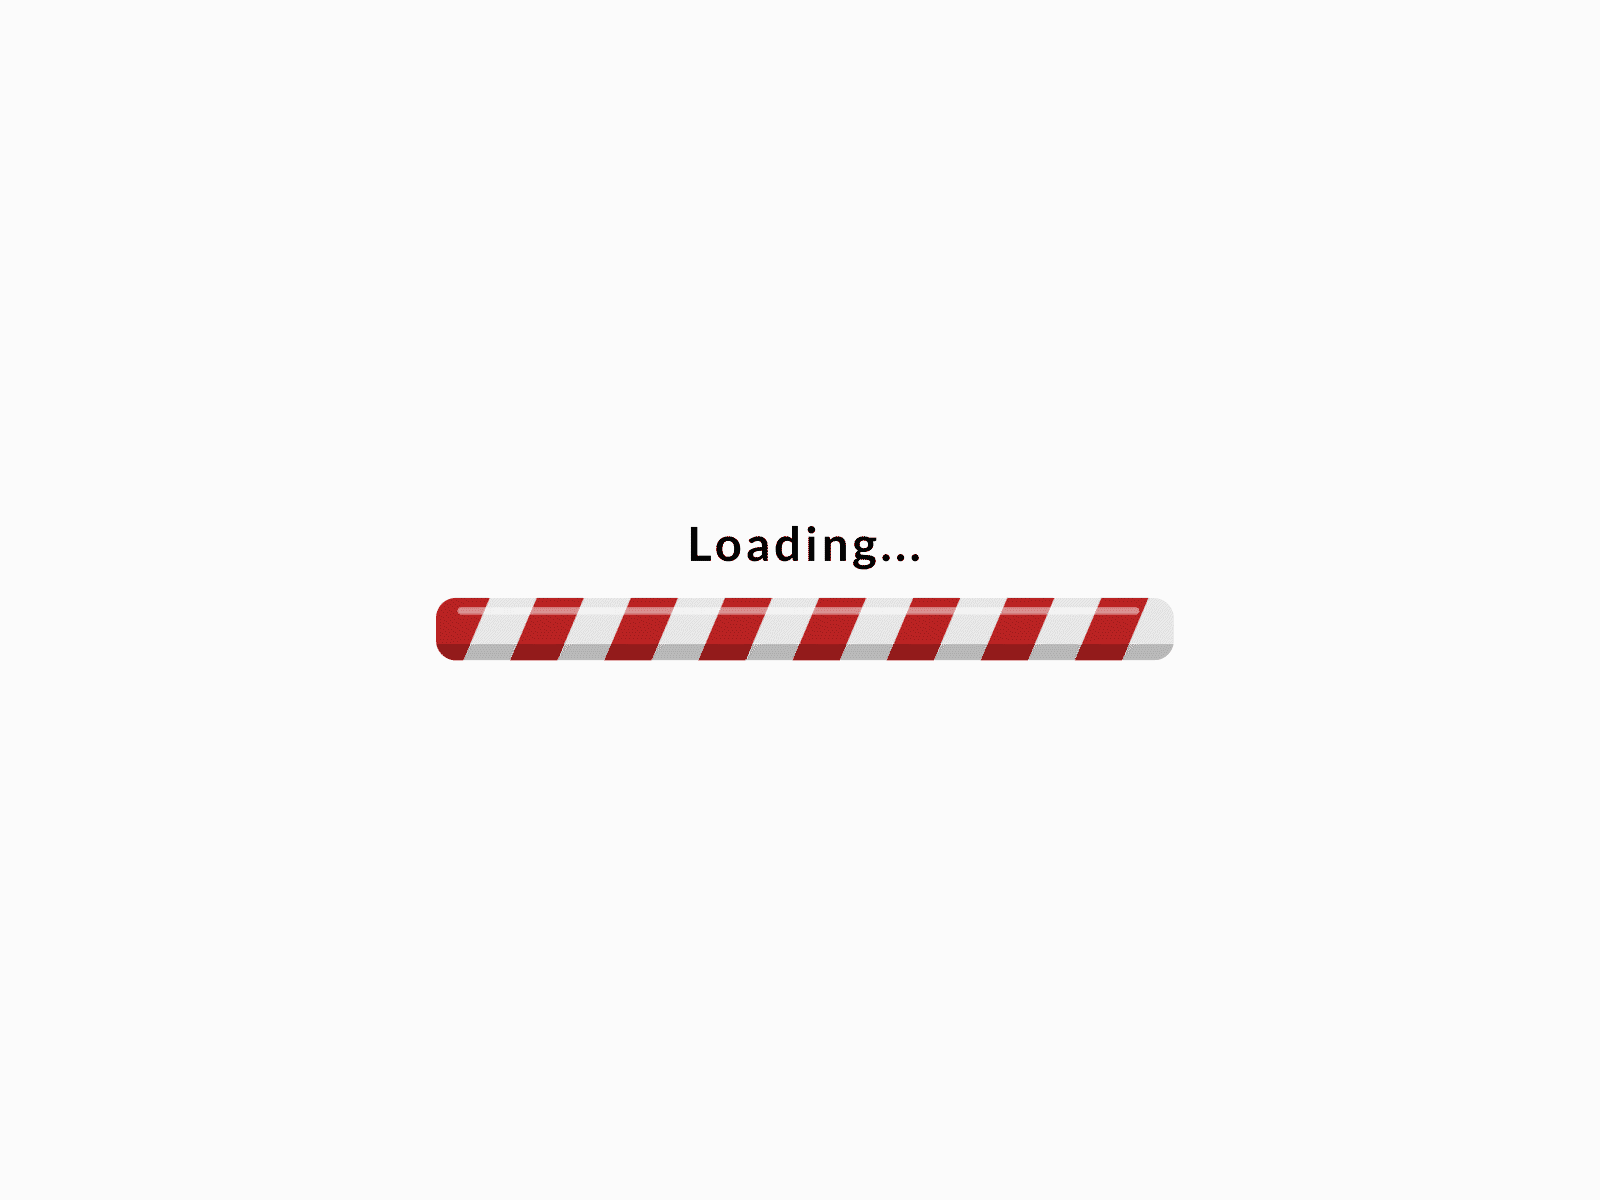 Holiday Loading Gif after affects aftereffects animated gif animation candy cane christmas gif gif animation holiday holiday design loader loading loading animation loading bar loading icon loading screen loop animation search results waiting